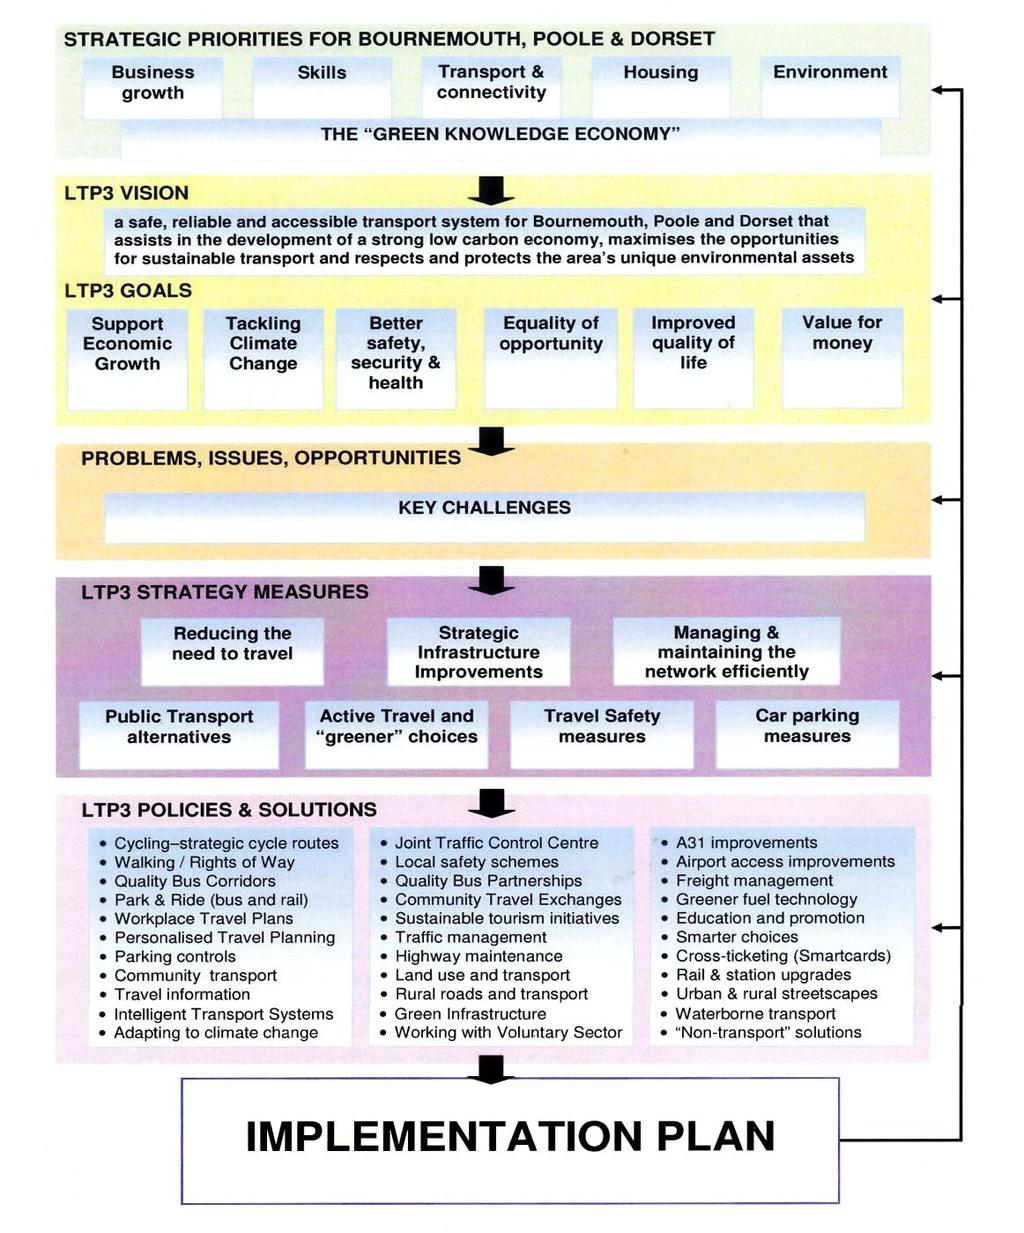 1.2 IP2 - Relationship to the LTP3 Strategy 1.2.1 The Implementation Plan sets out how, where and when the LTP3 strategy and policies will be delivered. Figure 1.